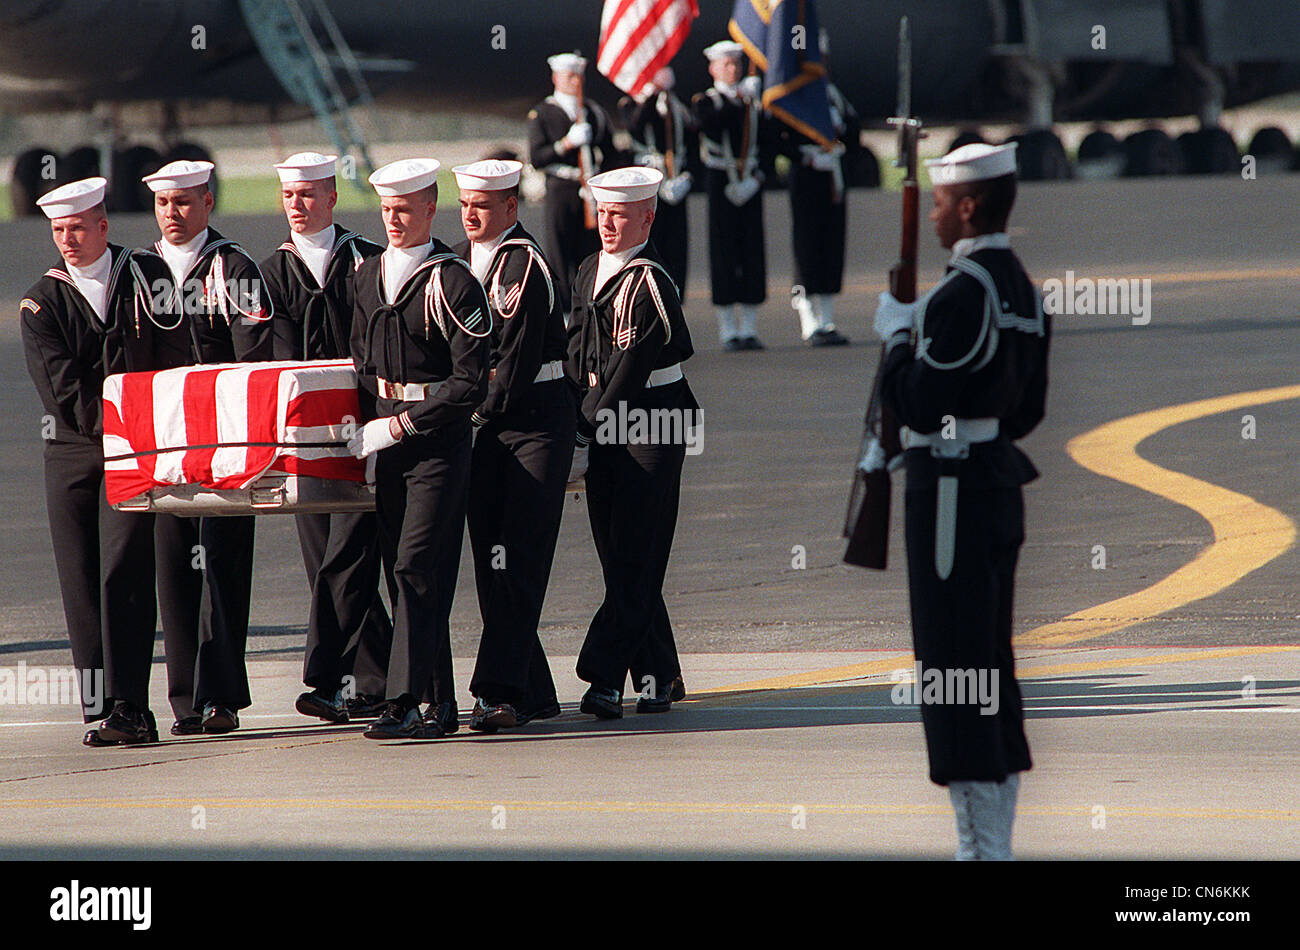 Navy pallbearers carry the remains of one of the 47 crew members killed in an explosion aboard the battleship USS IOWA (BB-61). The explosion occurred in the No. 2 16-inch gun turret as the IOWA was conducting routine gunnery exercises approximately 300 miles northeast of Puerto Rico on April 19th. Stock Photo